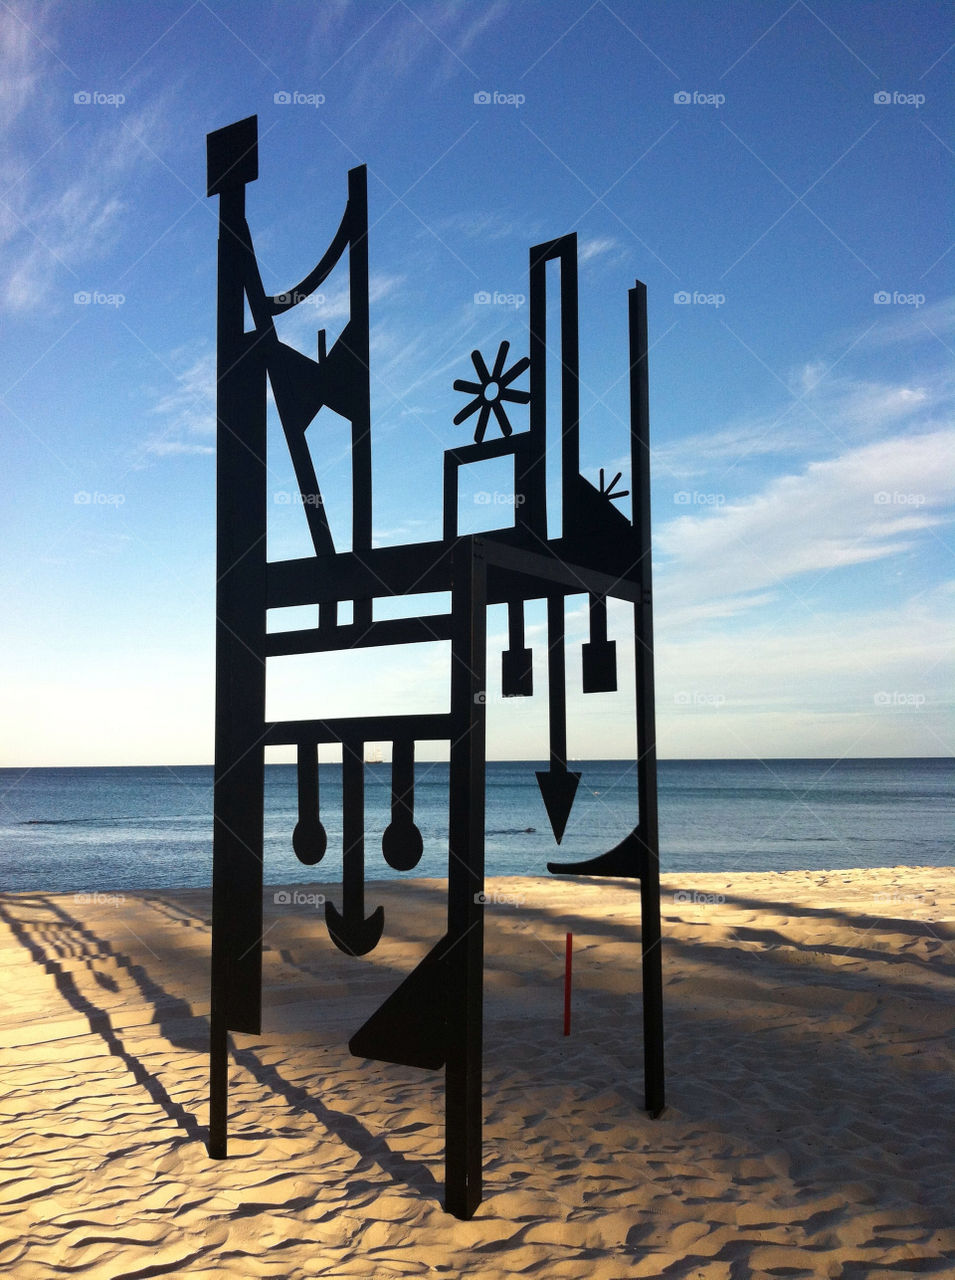 beach silhouette sculpture by theshmoo